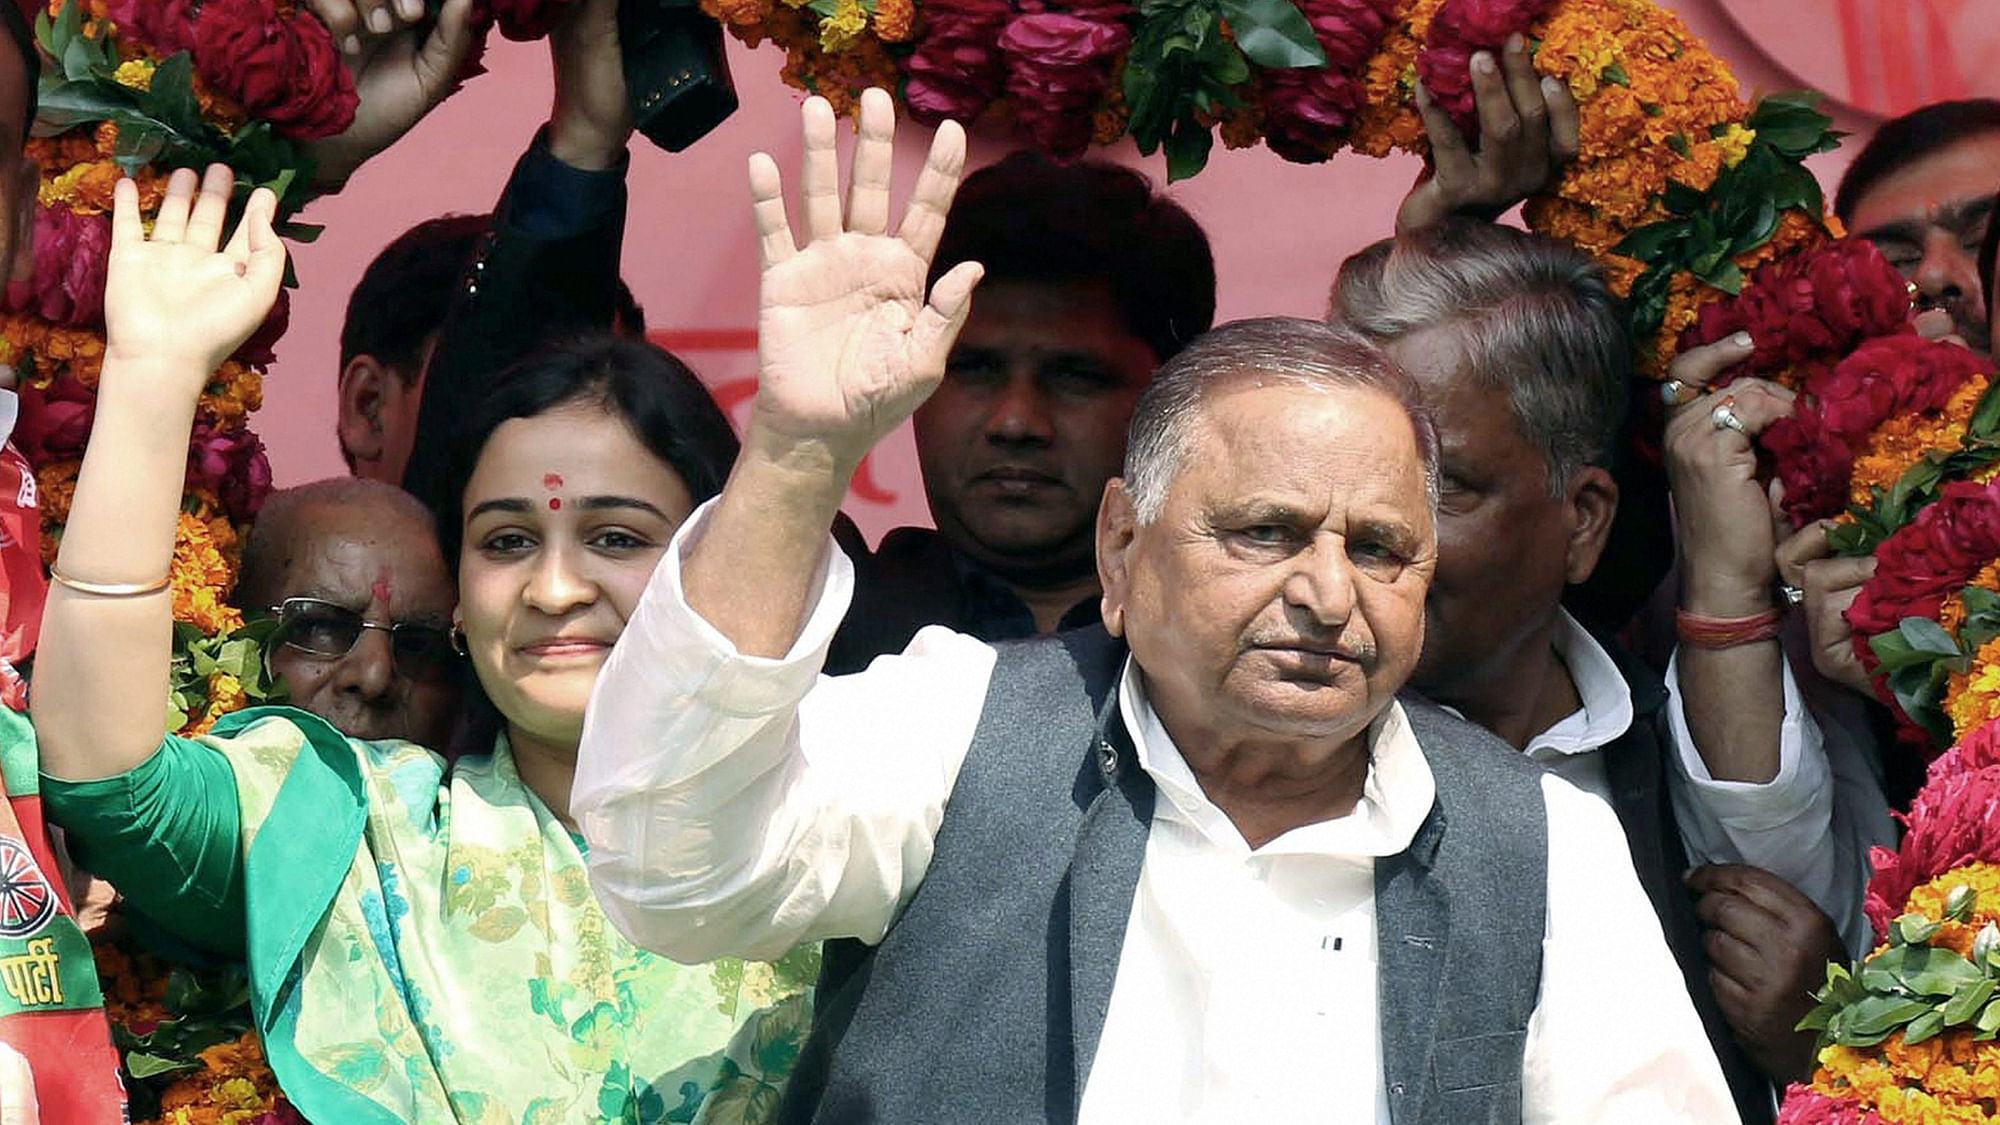 Mulayam Singh Yadav and Aparna Yadav wave at supporters in Lucknow on Wednesday. (Photo: PTI)